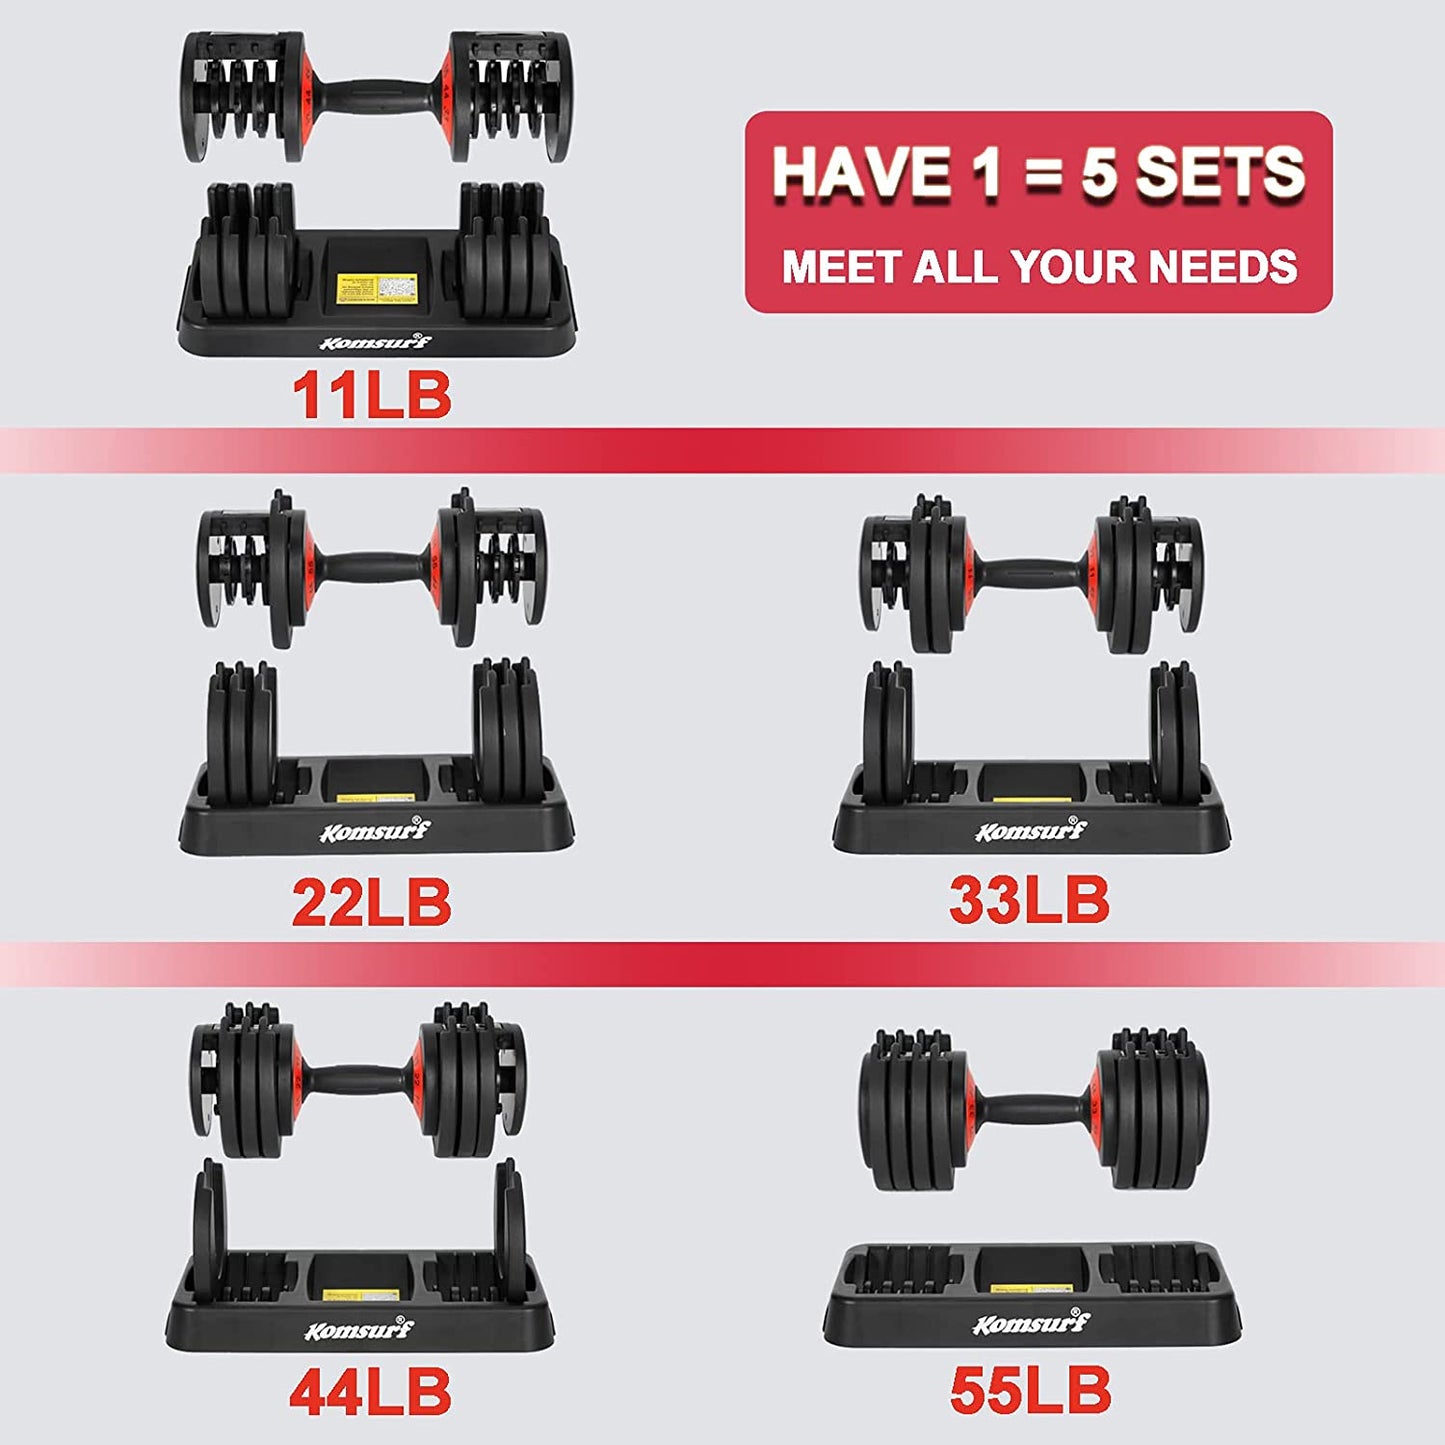 Professional Title: "Premium Adjustable Dumbbell - 25/55 Lb Single Dumbbell with Weight Dial Function, Effortless Weight Adjustment, Ergonomic Design for Men and Women, Includes Tray for Effective Strength Training - Black"